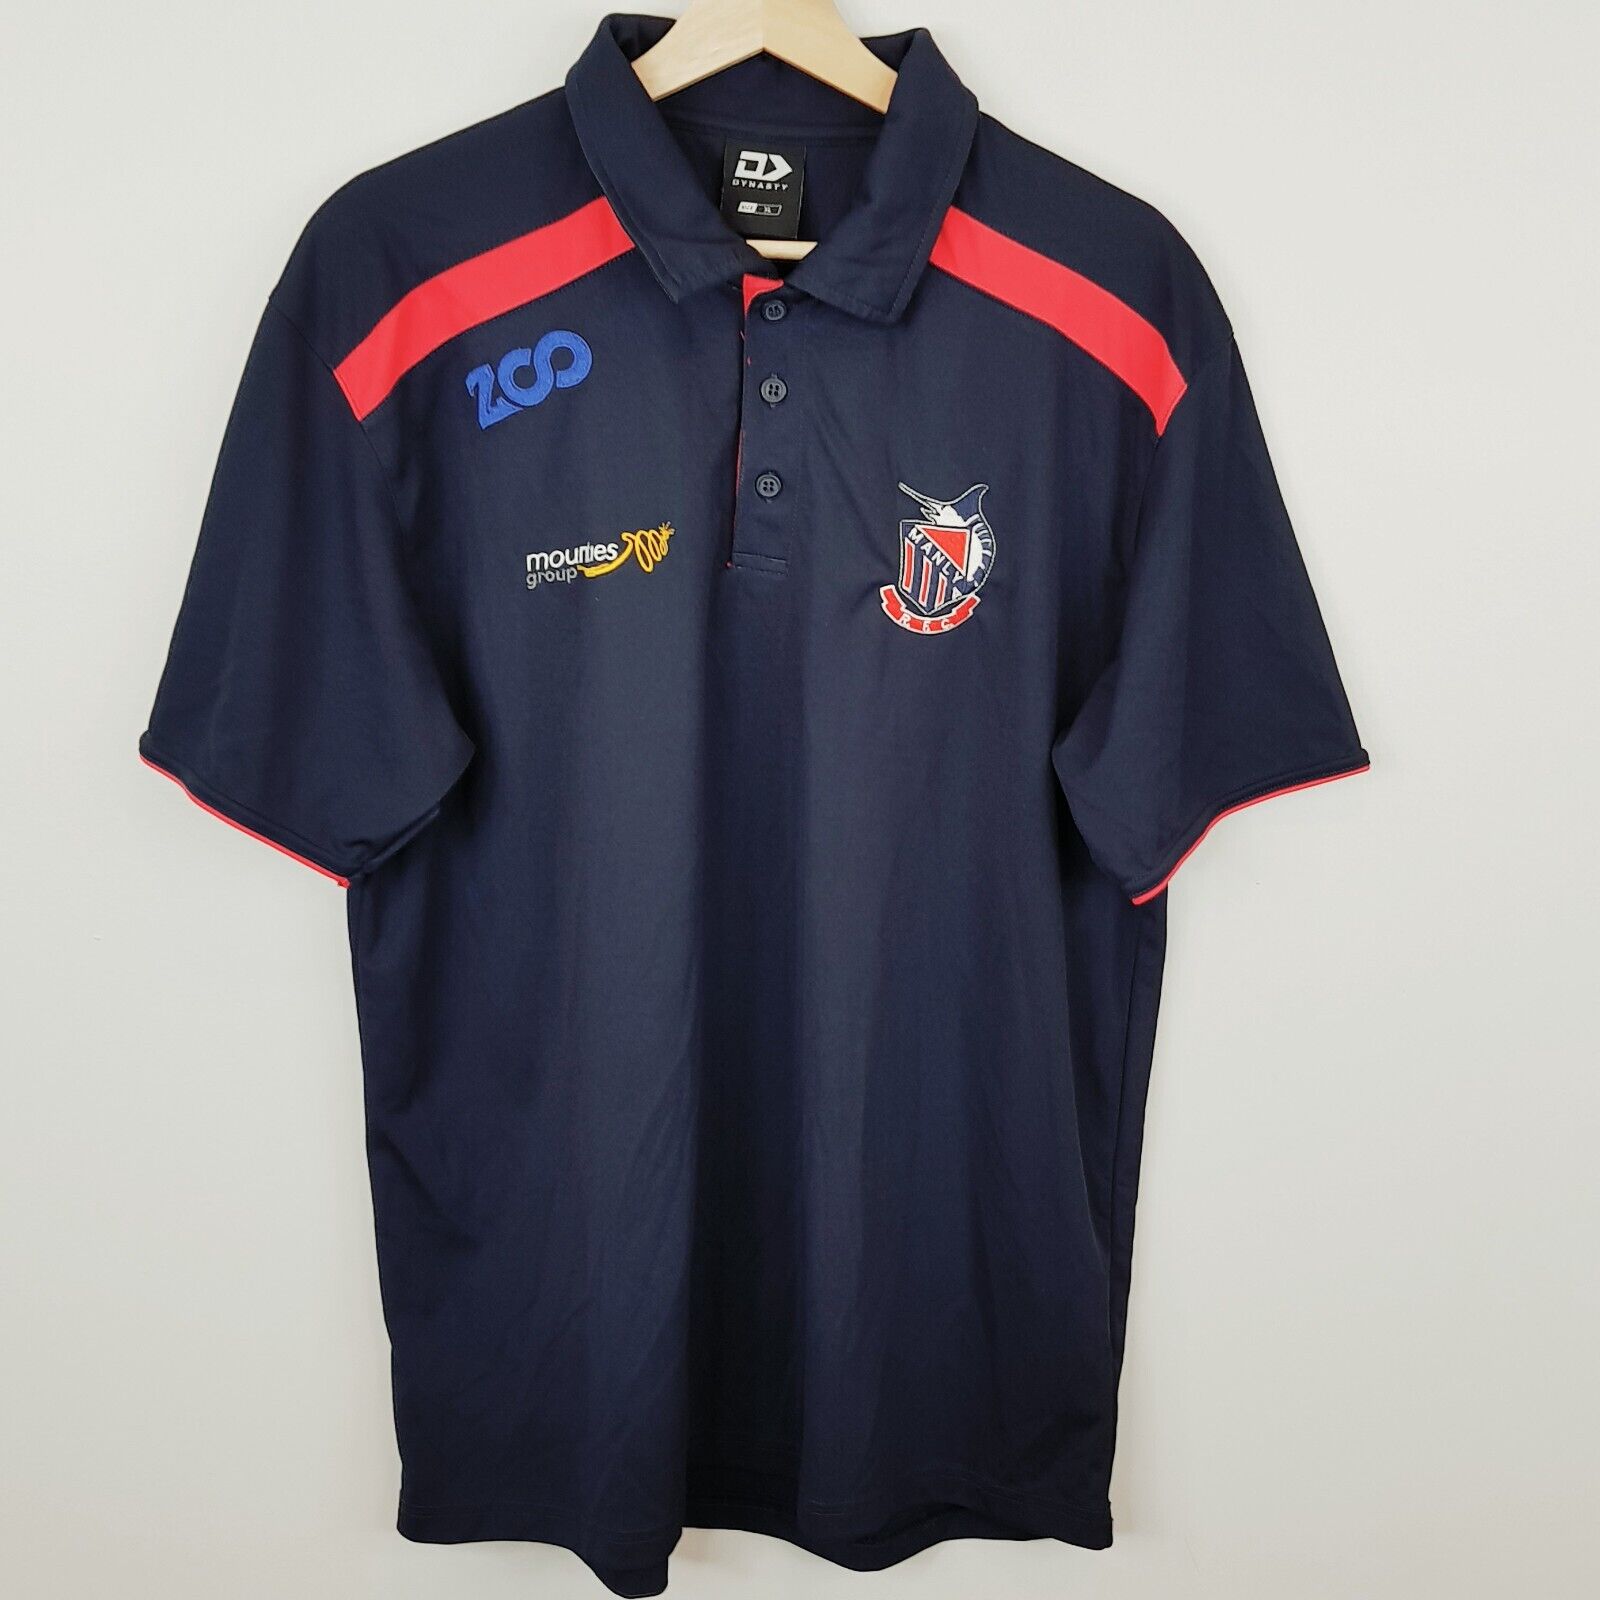 MANLY R.F.C Manly Marlins Rugby Union Football Club Mens Size XL Navy Polo